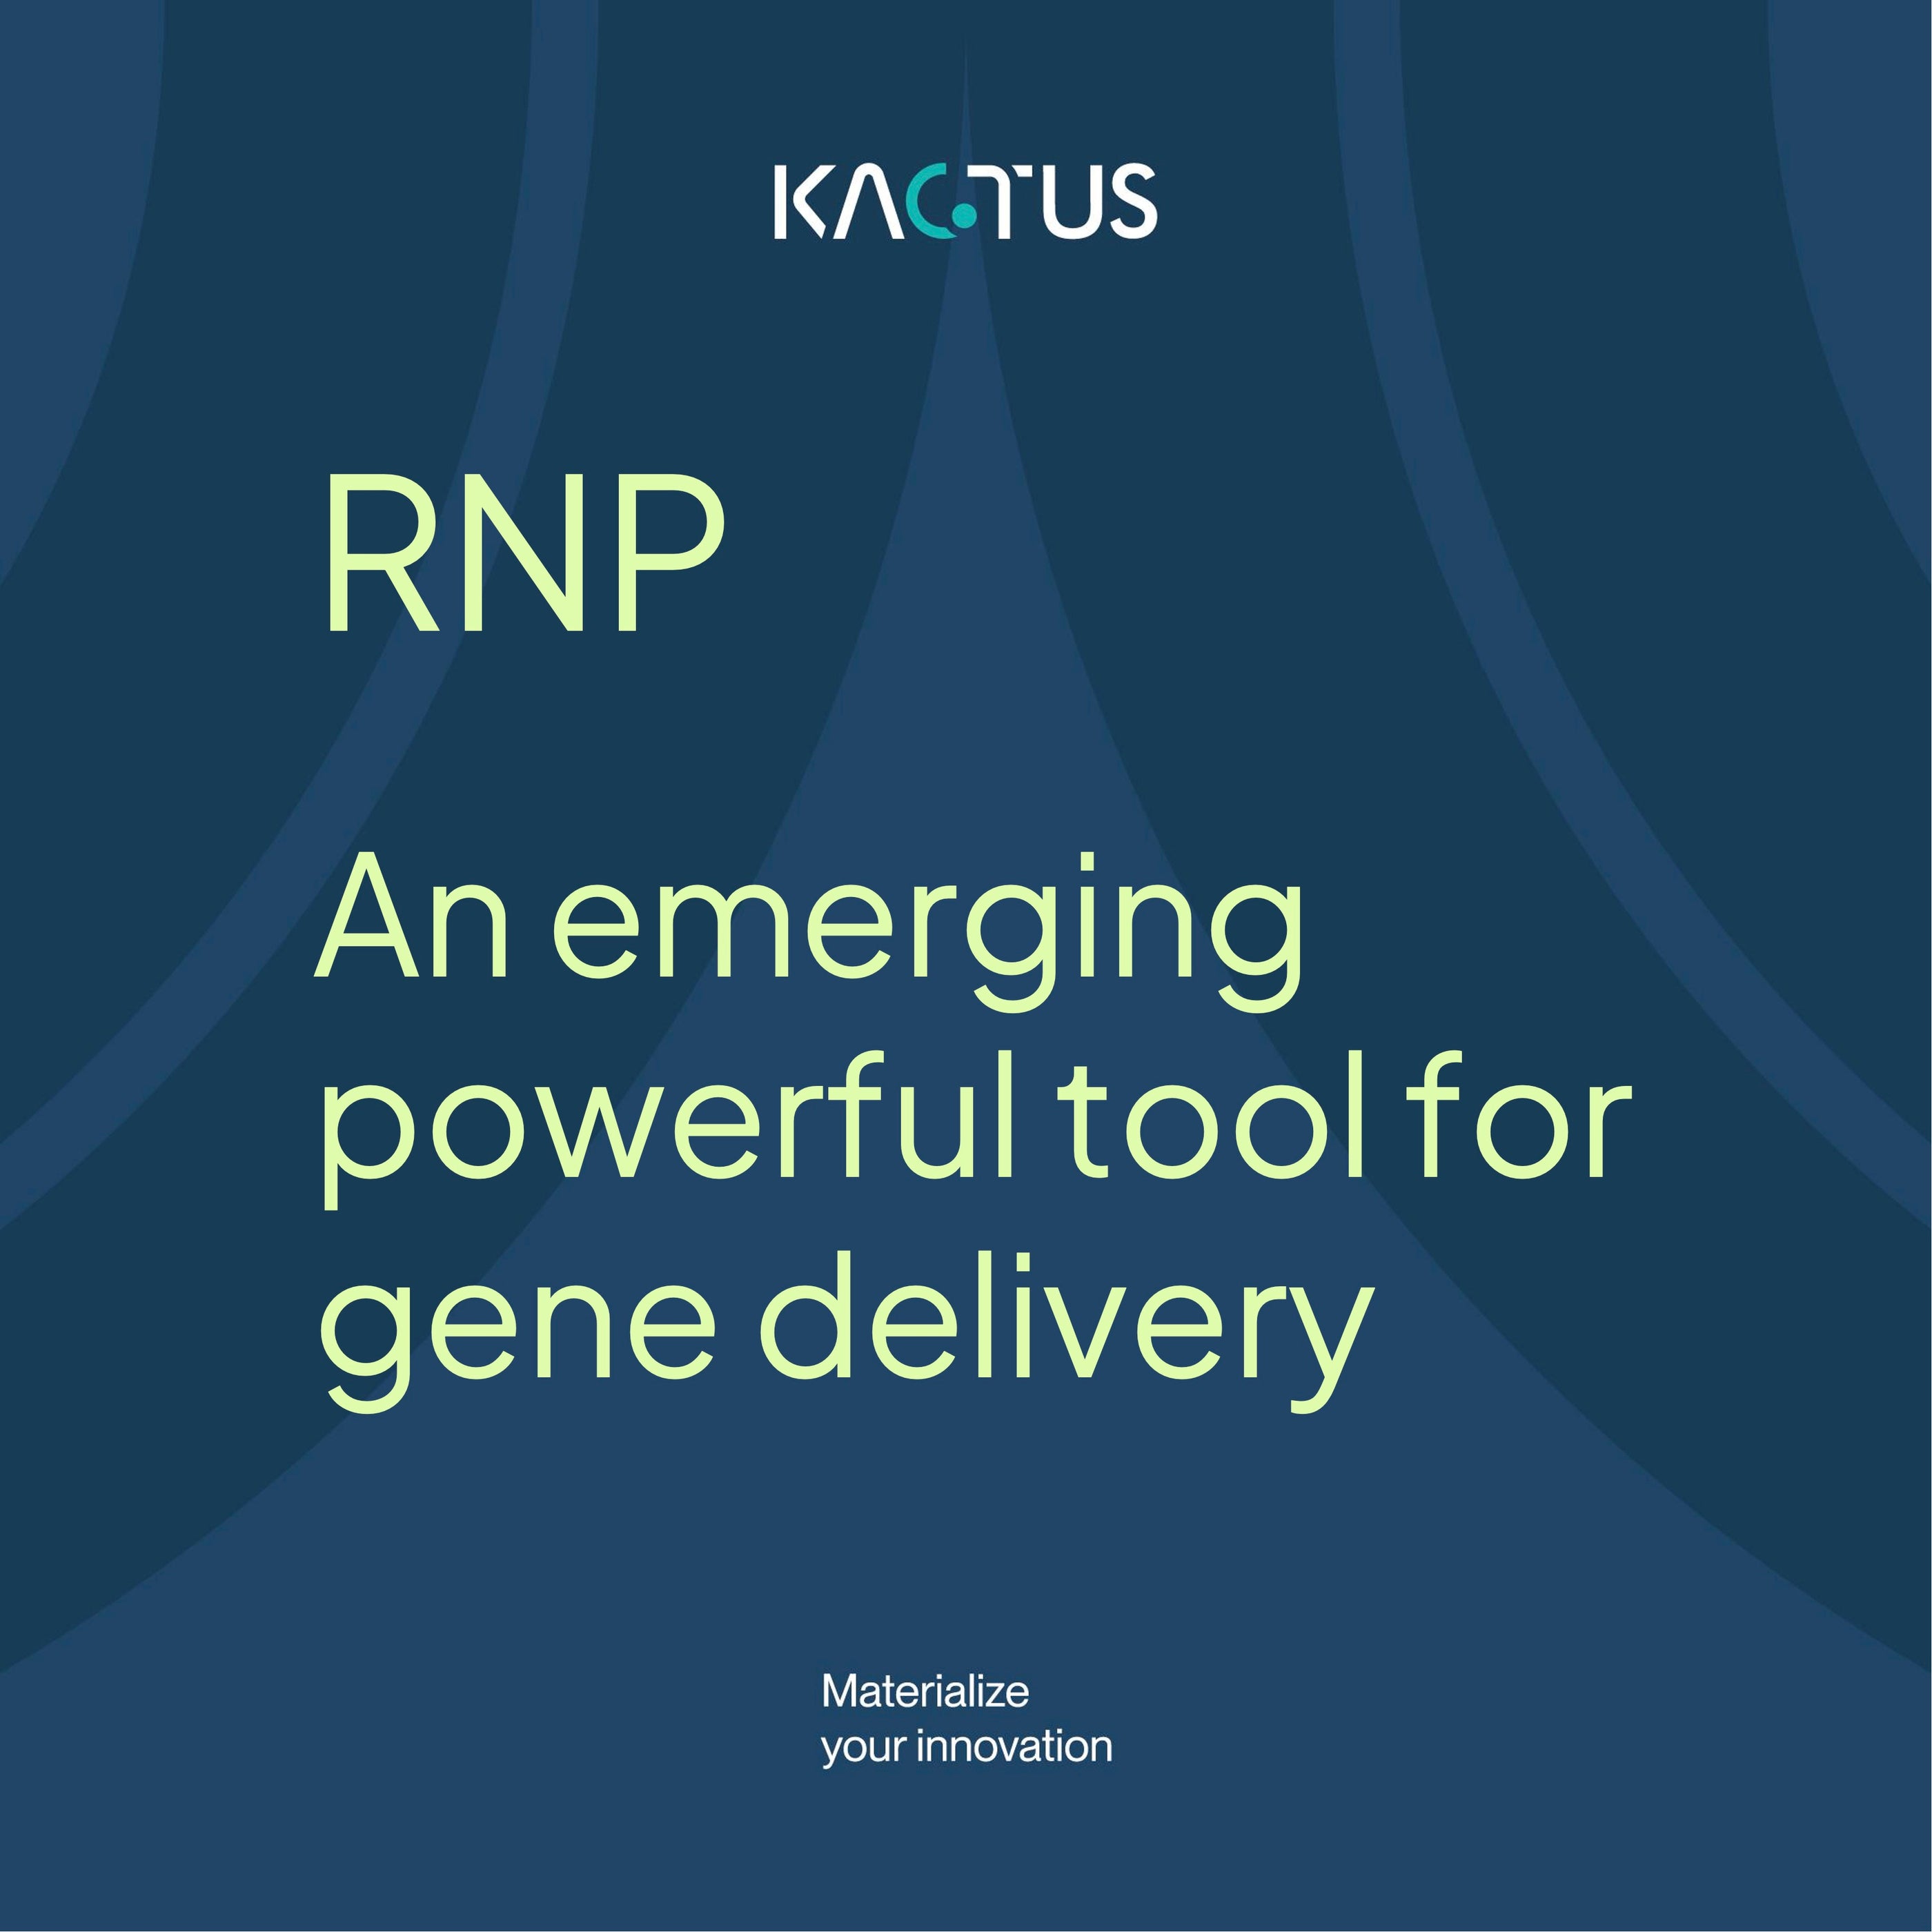 RNP, an emerging powerful tool for gene delivery